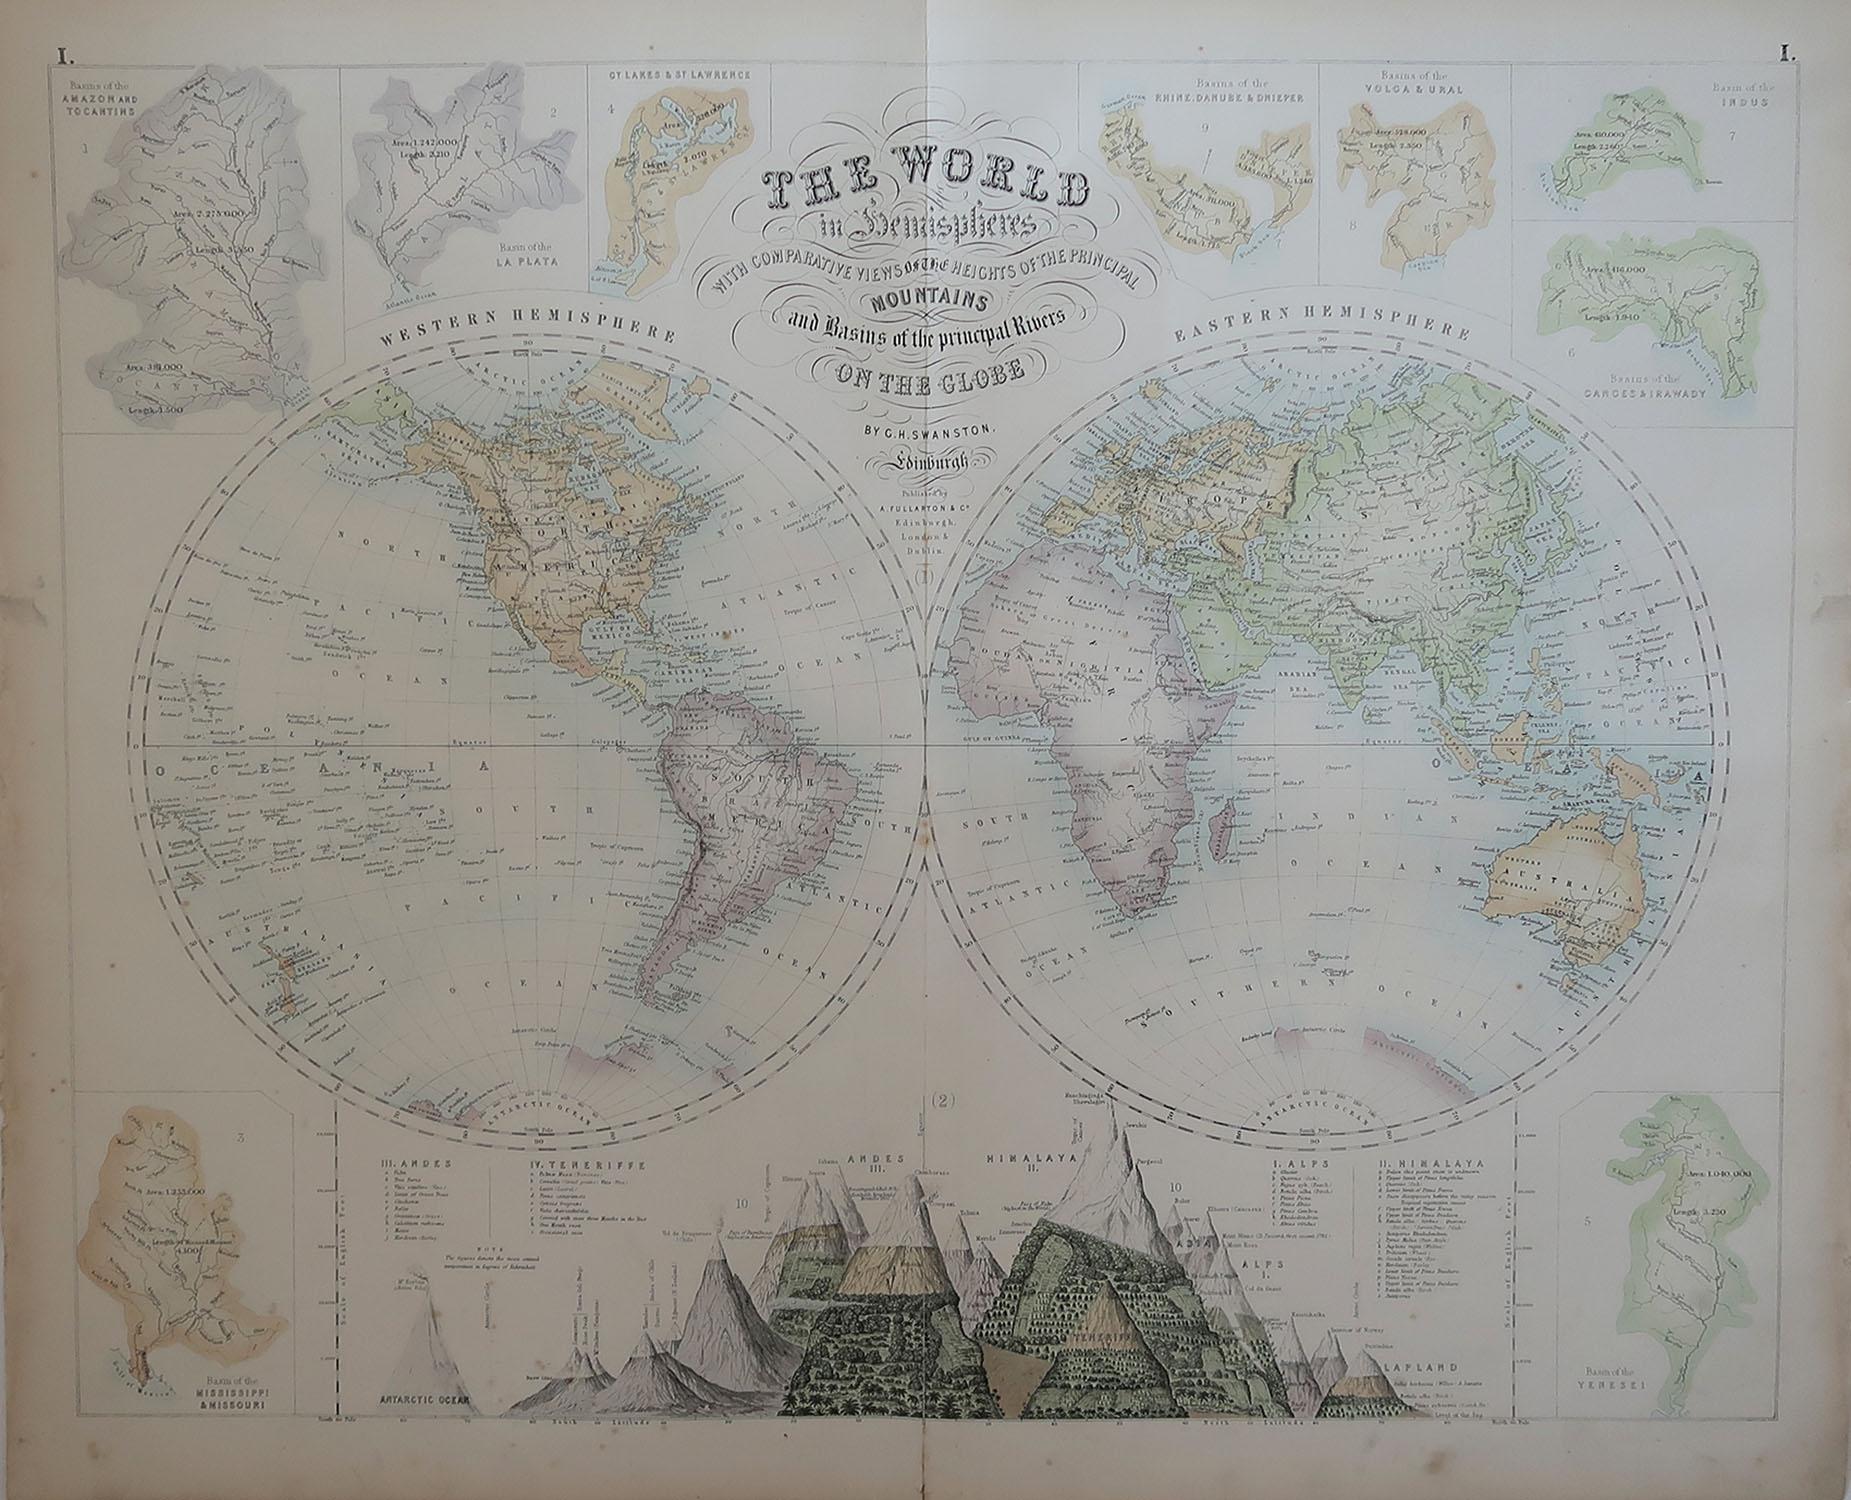 Great map of the World. Showing both hemispheres

From the celebrated Royal Illustrated Atlas

Lithograph. Original color. 

Published by Fullarton, Edinburgh, C.1870

Unframed.












